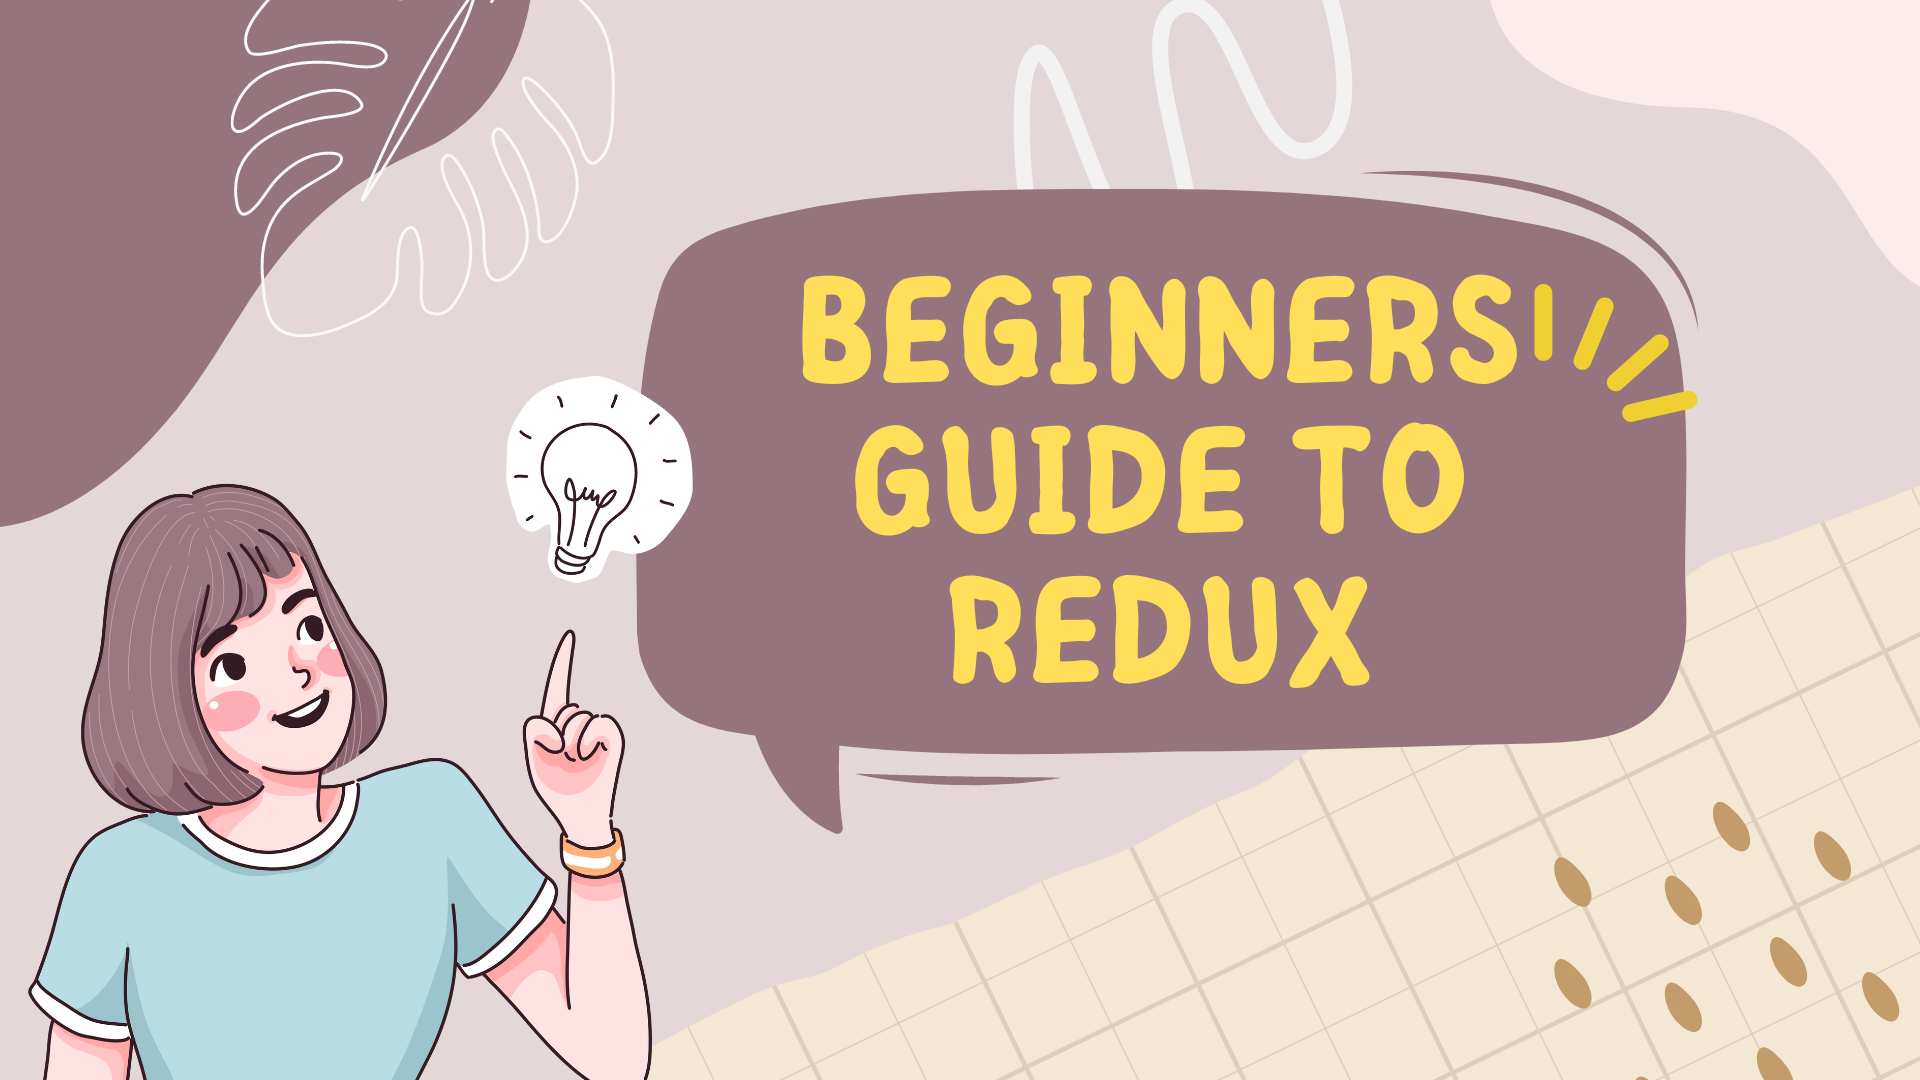 A comprehensive guide to Redux for beginners